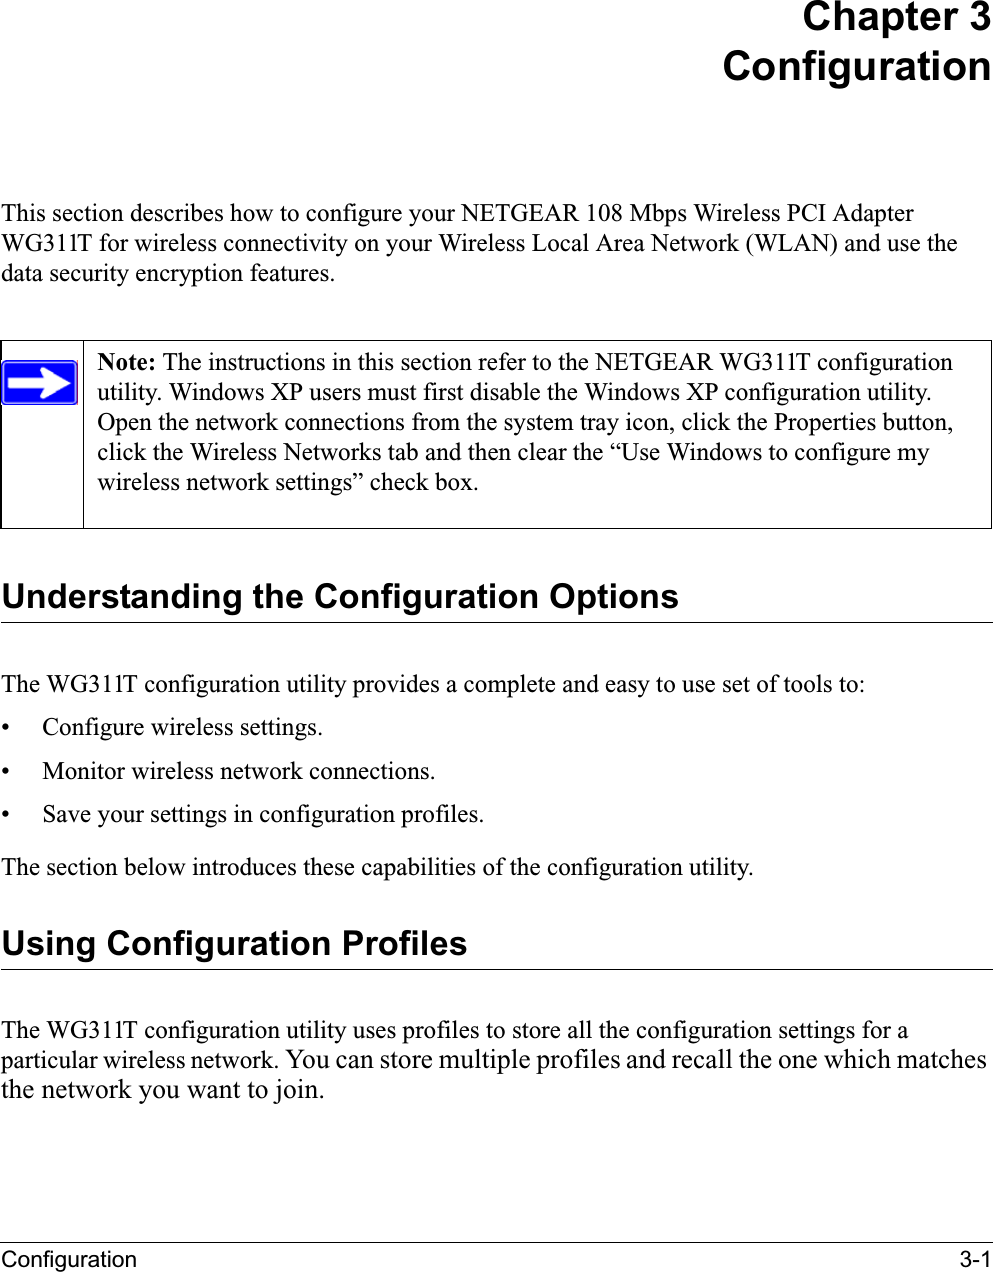 Configuration 3-1Chapter 3ConfigurationThis section describes how to configure your NETGEAR 108 Mbps Wireless PCI Adapter WG311T for wireless connectivity on your Wireless Local Area Network (WLAN) and use the data security encryption features. Understanding the Configuration OptionsThe WG311T configuration utility provides a complete and easy to use set of tools to:• Configure wireless settings.• Monitor wireless network connections.• Save your settings in configuration profiles.The section below introduces these capabilities of the configuration utility. Using Configuration ProfilesThe WG311T configuration utility uses profiles to store all the configuration settings for a particular wireless network. You can store multiple profiles and recall the one which matches the network you want to join.Note: The instructions in this section refer to the NETGEAR WG311T configuration utility. Windows XP users must first disable the Windows XP configuration utility. Open the network connections from the system tray icon, click the Properties button, click the Wireless Networks tab and then clear the “Use Windows to configure my wireless network settings” check box.